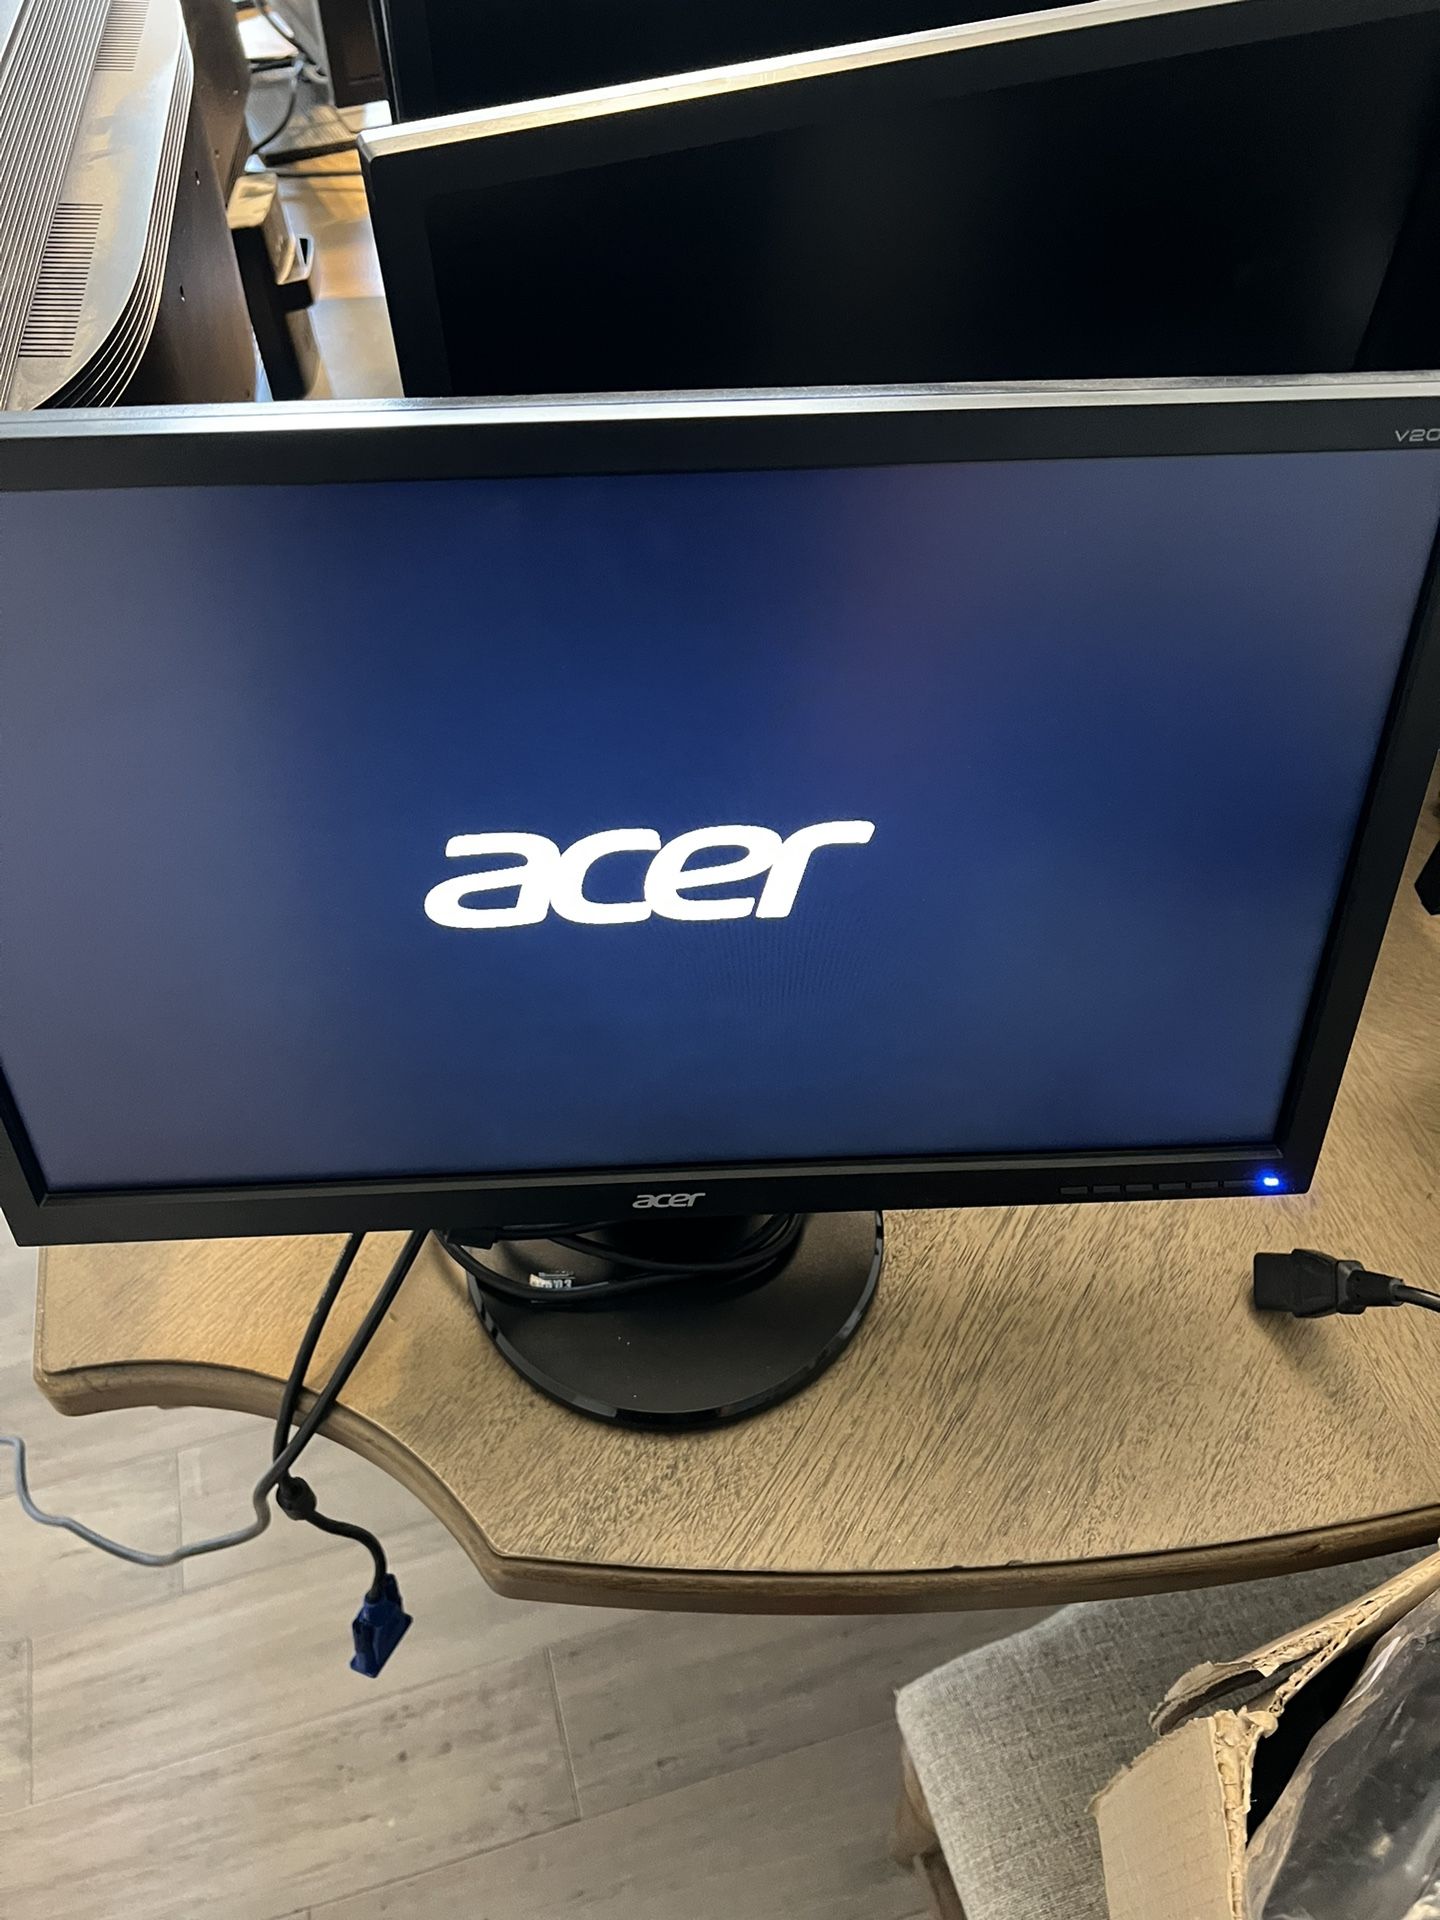 Acre 19” LCD Monitor